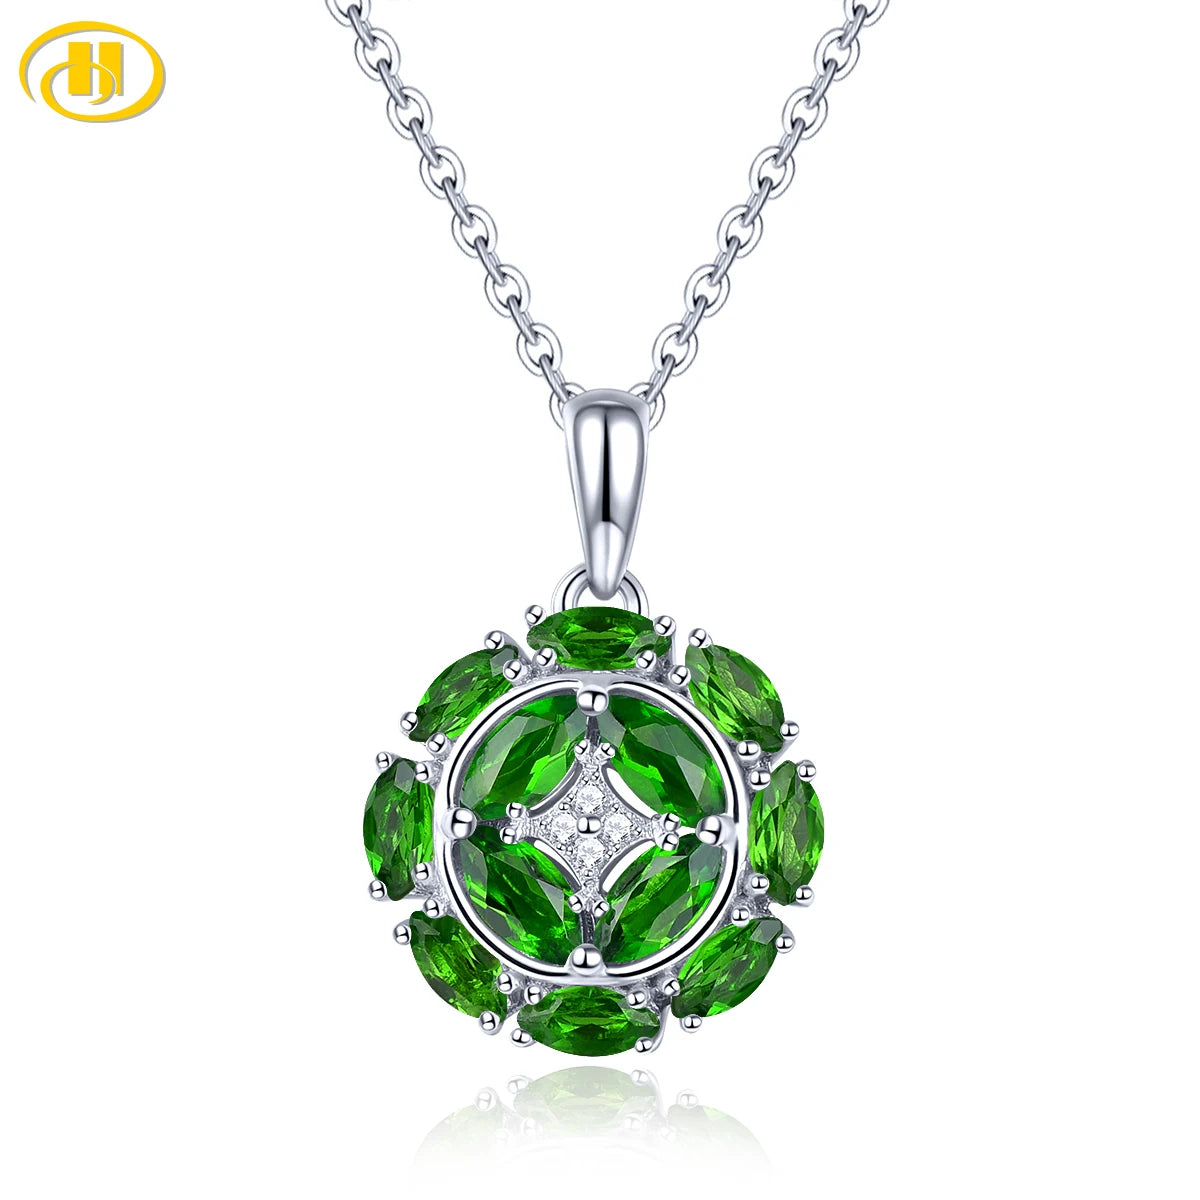 Natural Tanzanite Solid Silver Pendants 1.3 Carats Genuine Gemstone Women's Classic Charming Style Jewelry Gift for Anniversary Natural Diopside